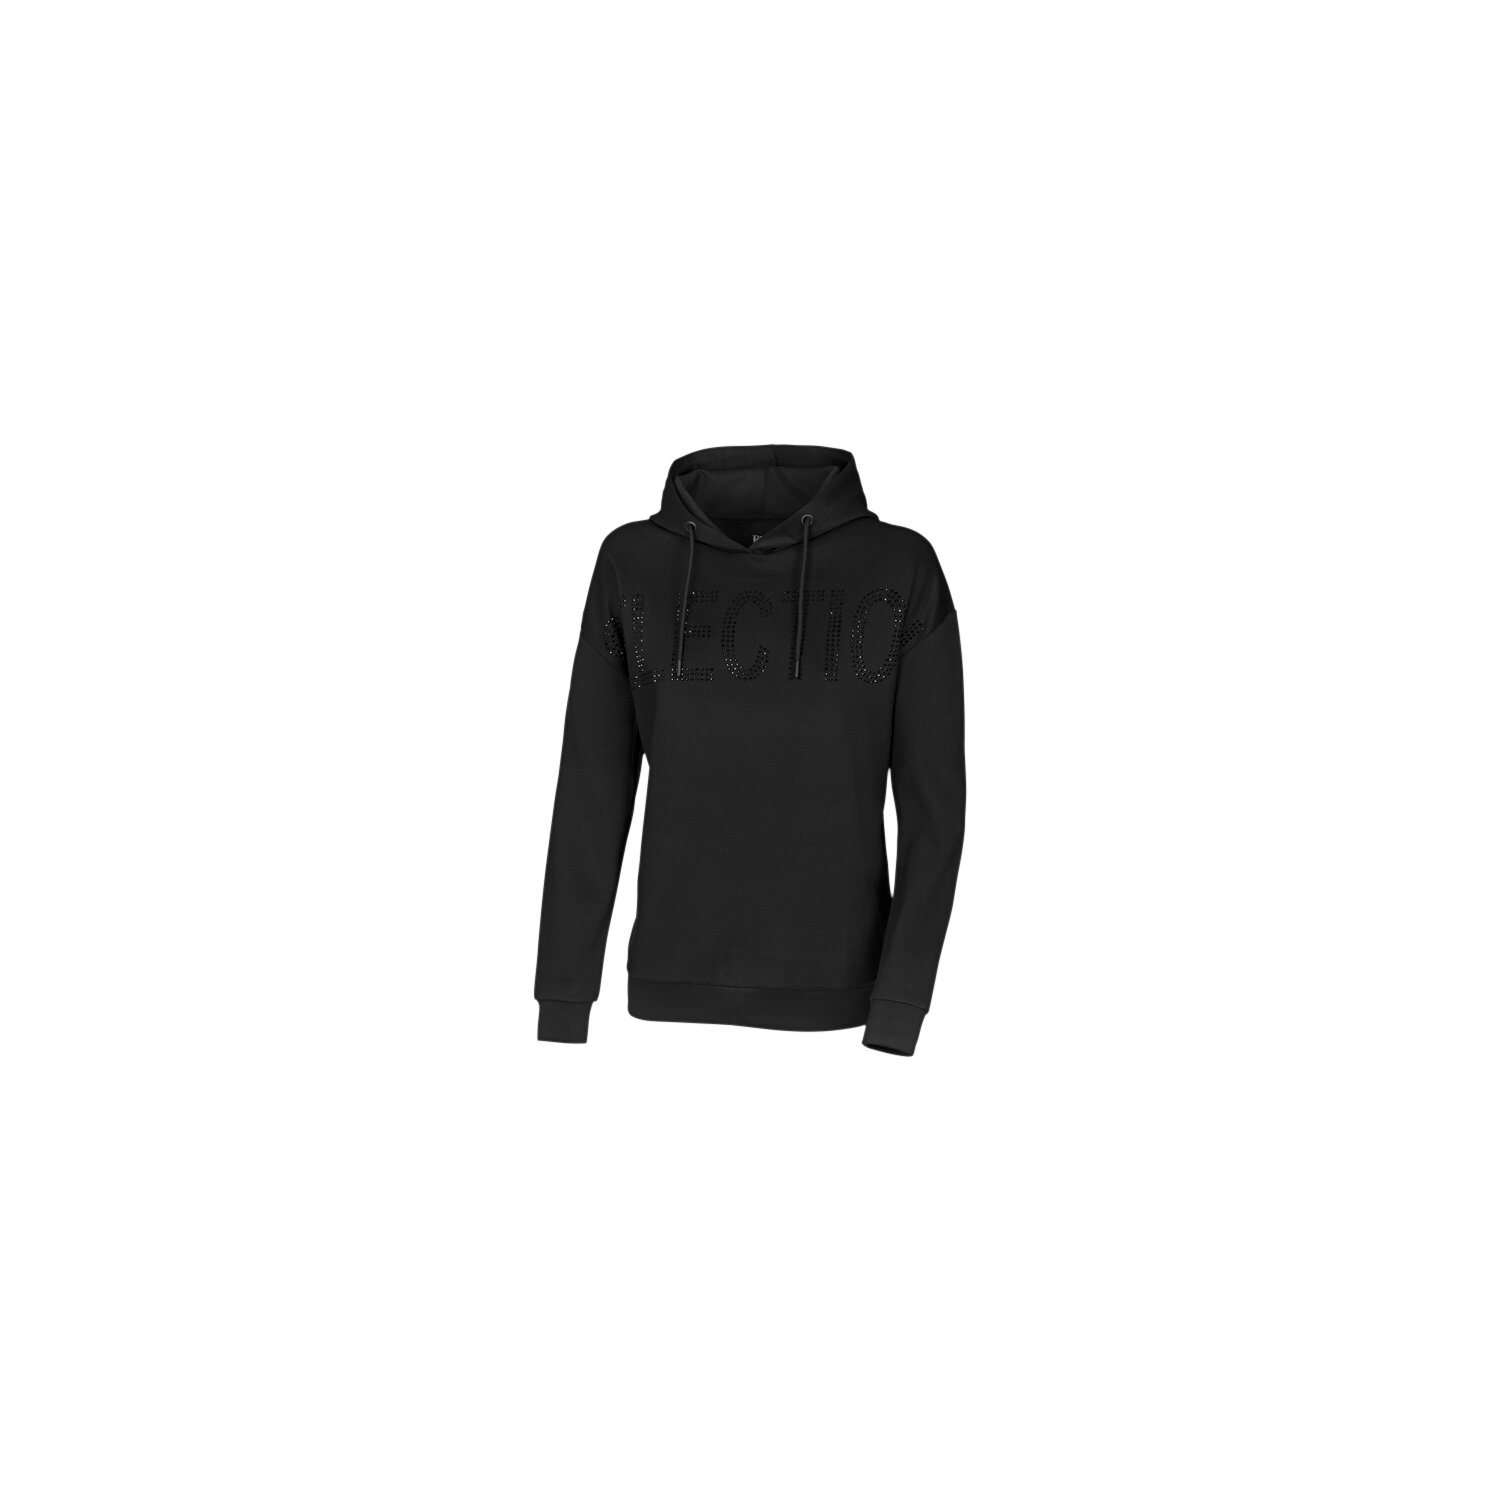 PIKEUR Funktions-Hoodie Phine Selection 